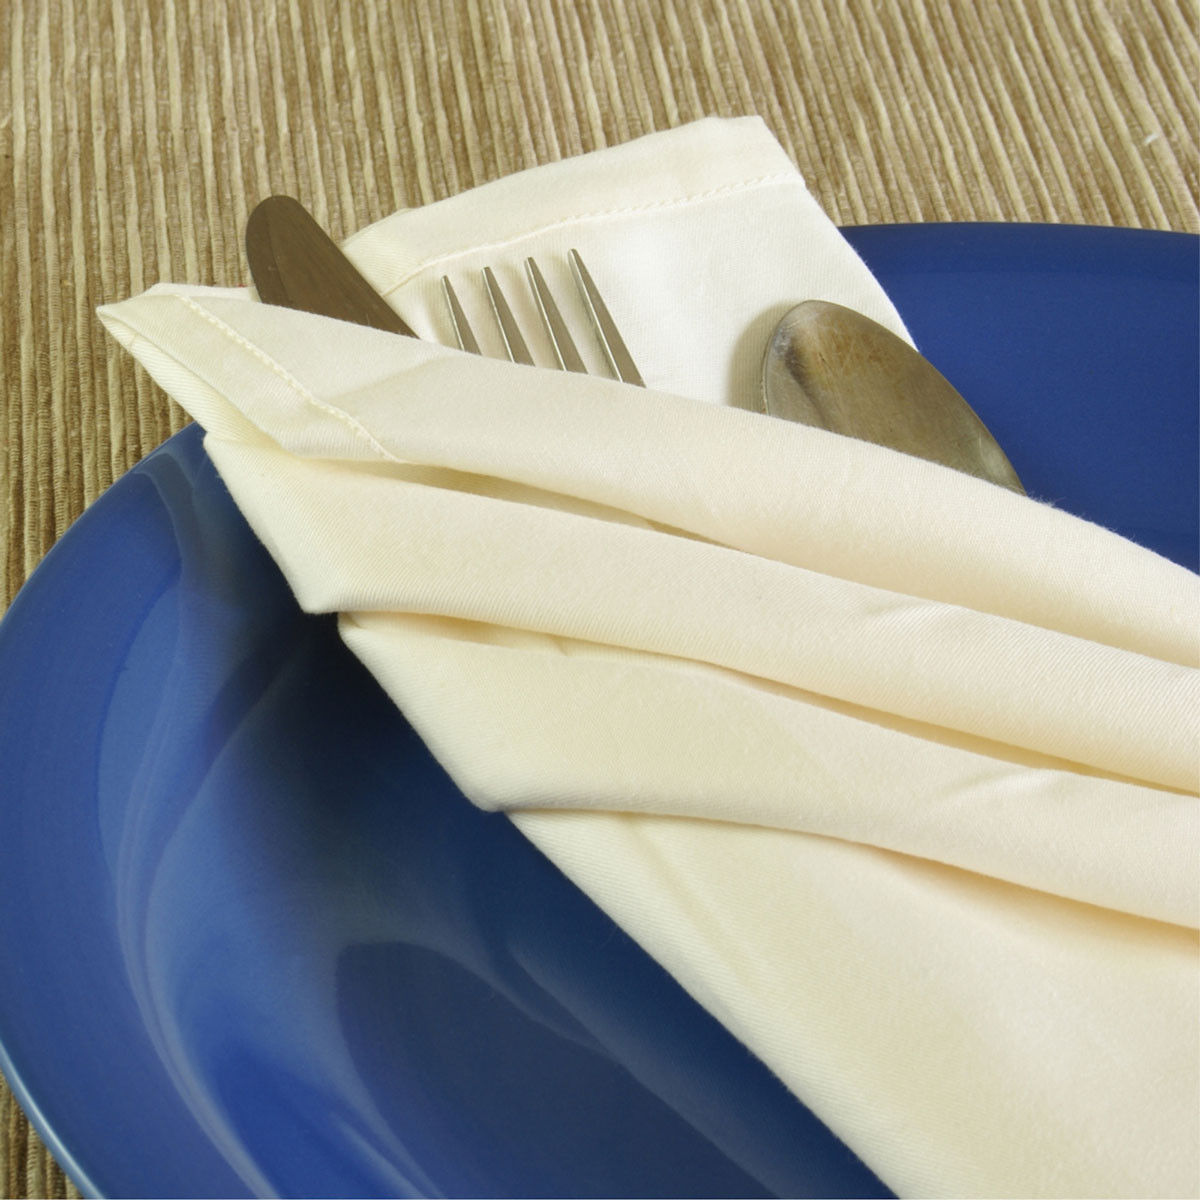 What spun polyester fabric wholesale treatment do Infinity Spun Polyester Napkins have?